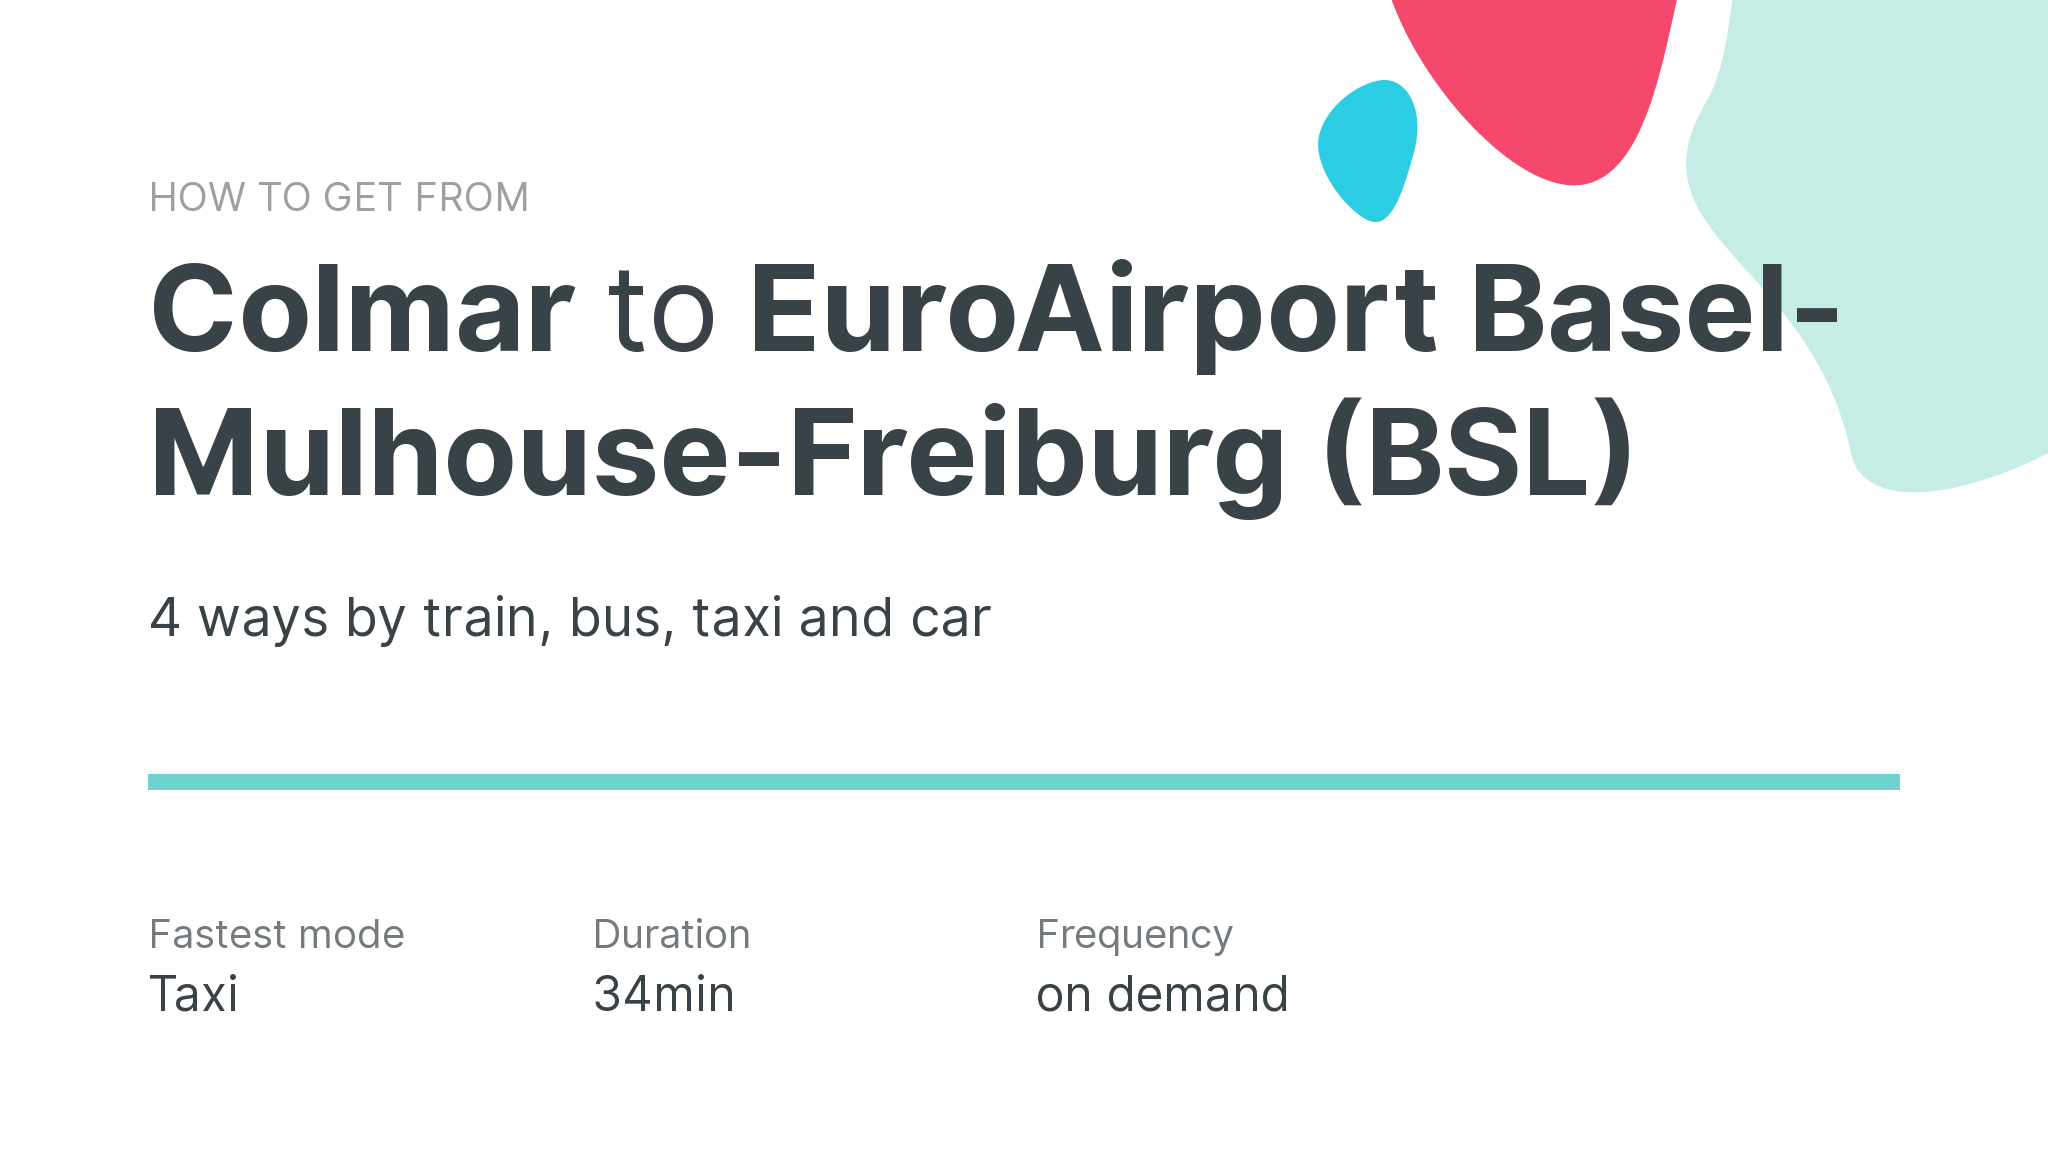 How do I get from Colmar to EuroAirport Basel-Mulhouse-Freiburg (BSL)